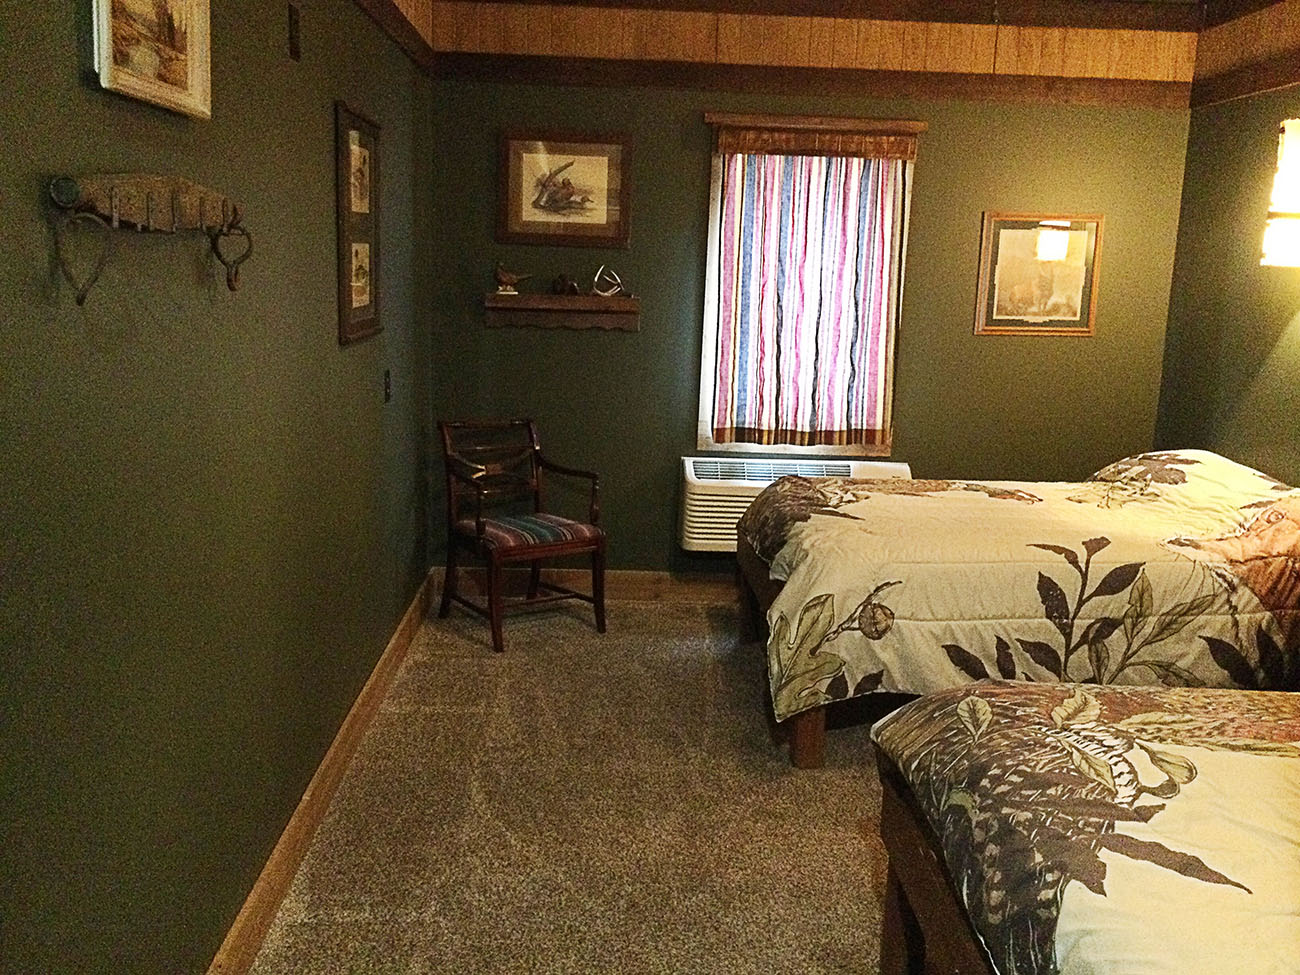 Bedroom in the lodge